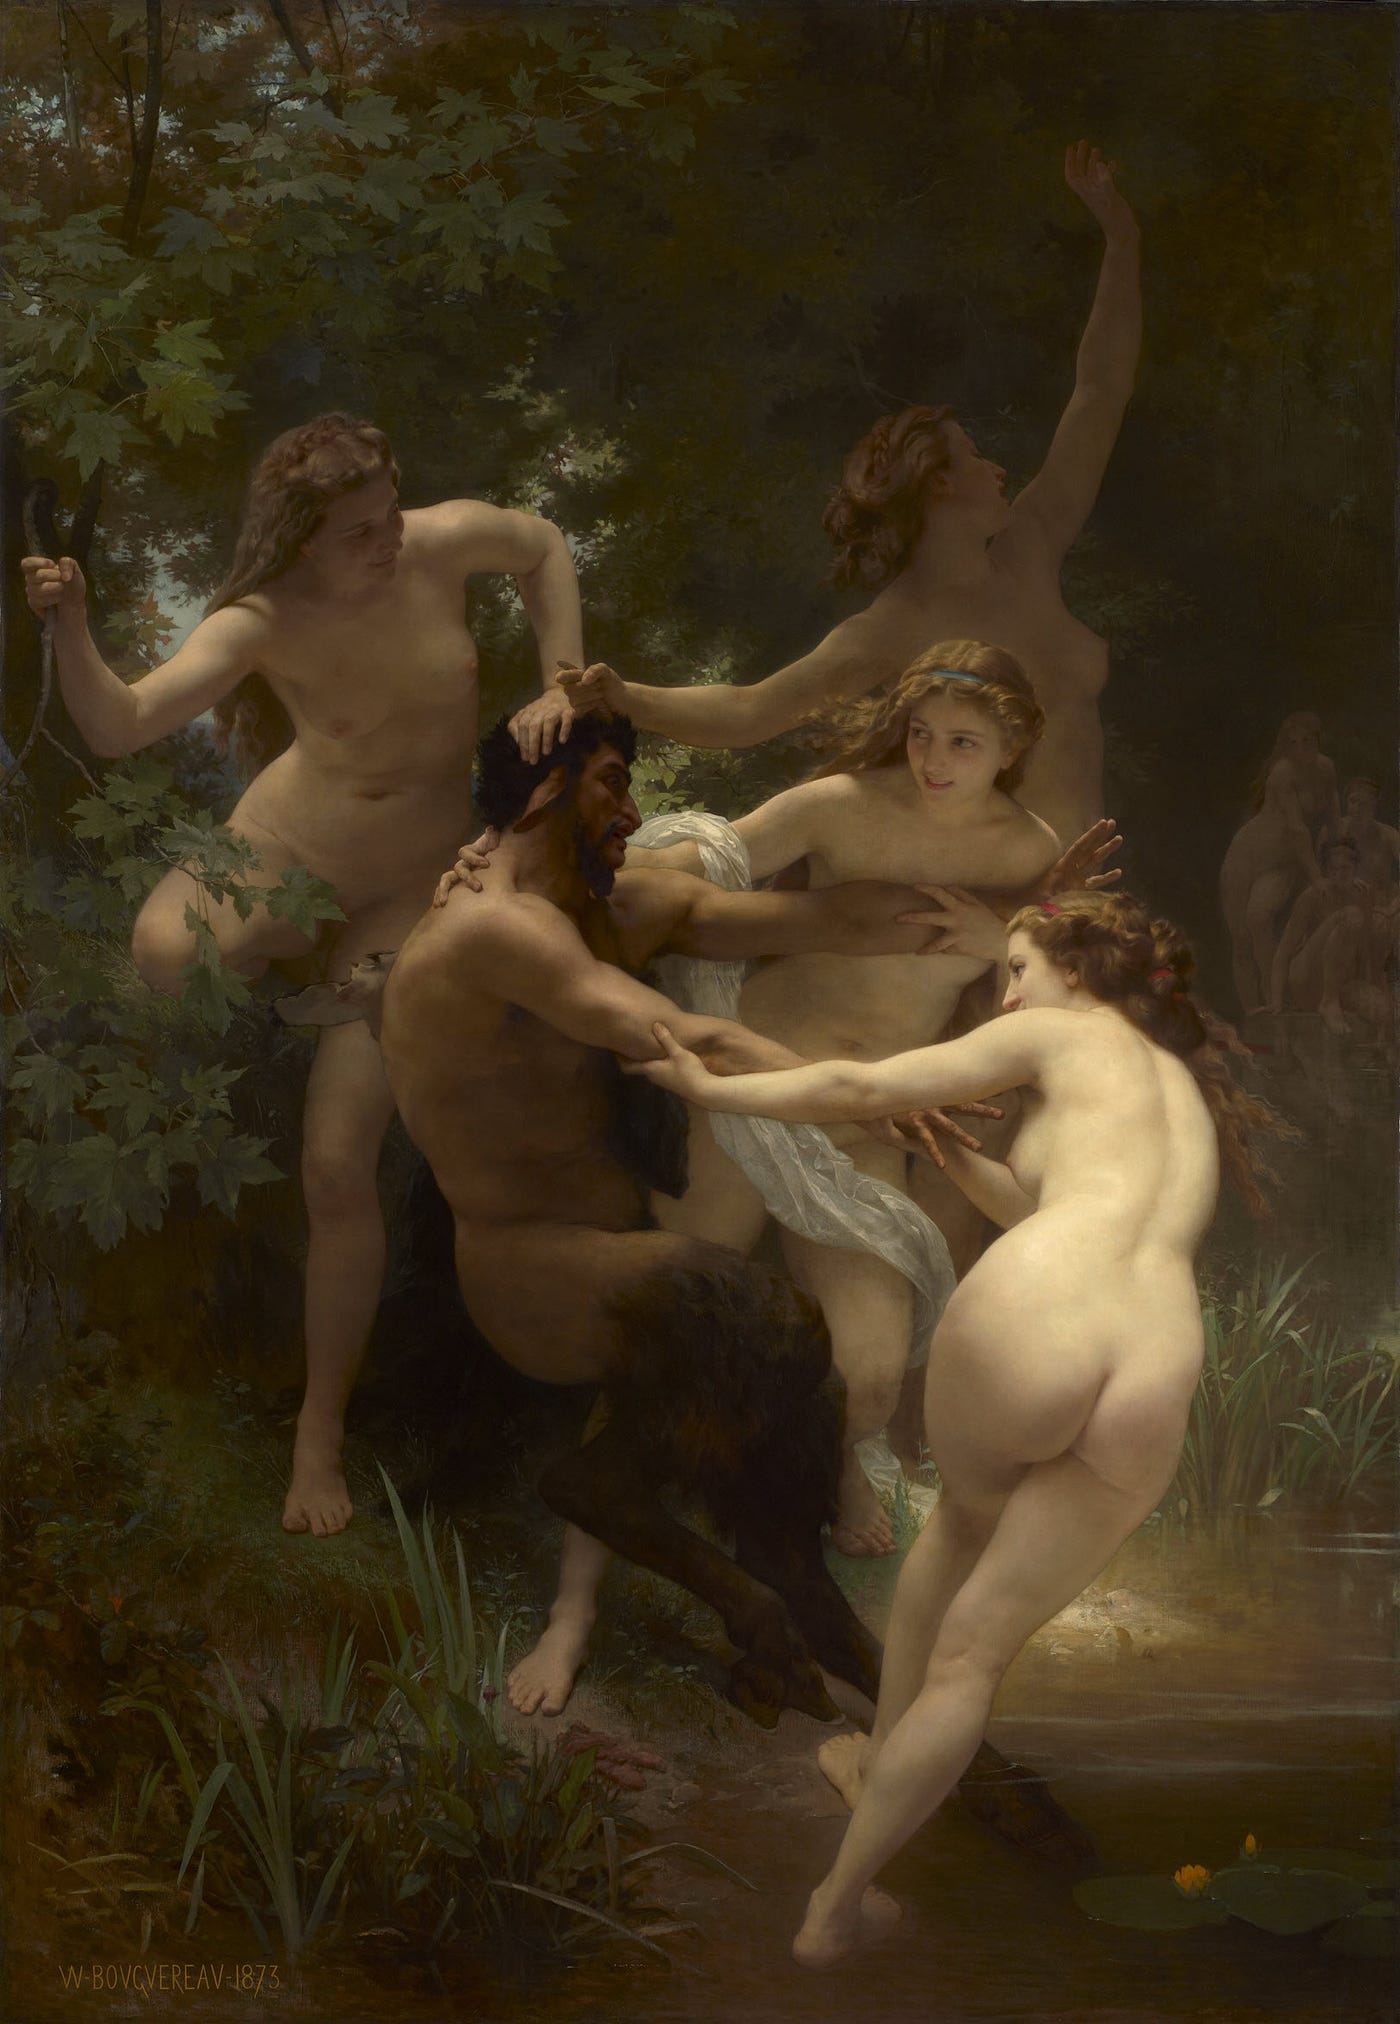 The Nymphs and Satyrs of William-Adolphe Bouguereau by Remy Dean Signifier Medium picture